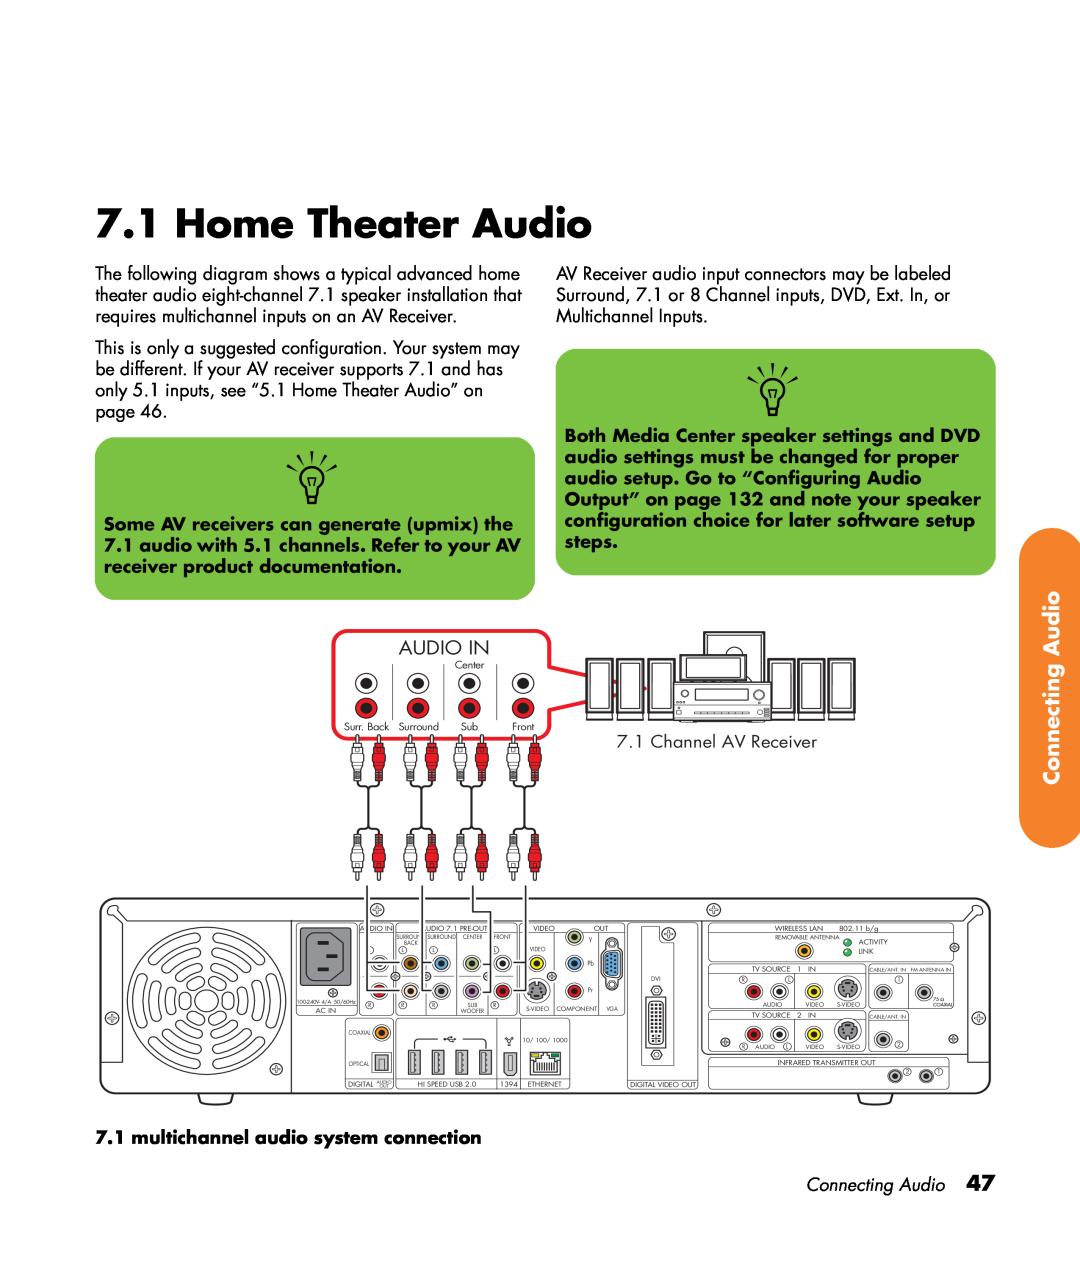 HP z545, z557, z555, z552, z540 manual Home Theater Audio, Connecting Audio, Audio In, Some AV receivers can generate upmix the 